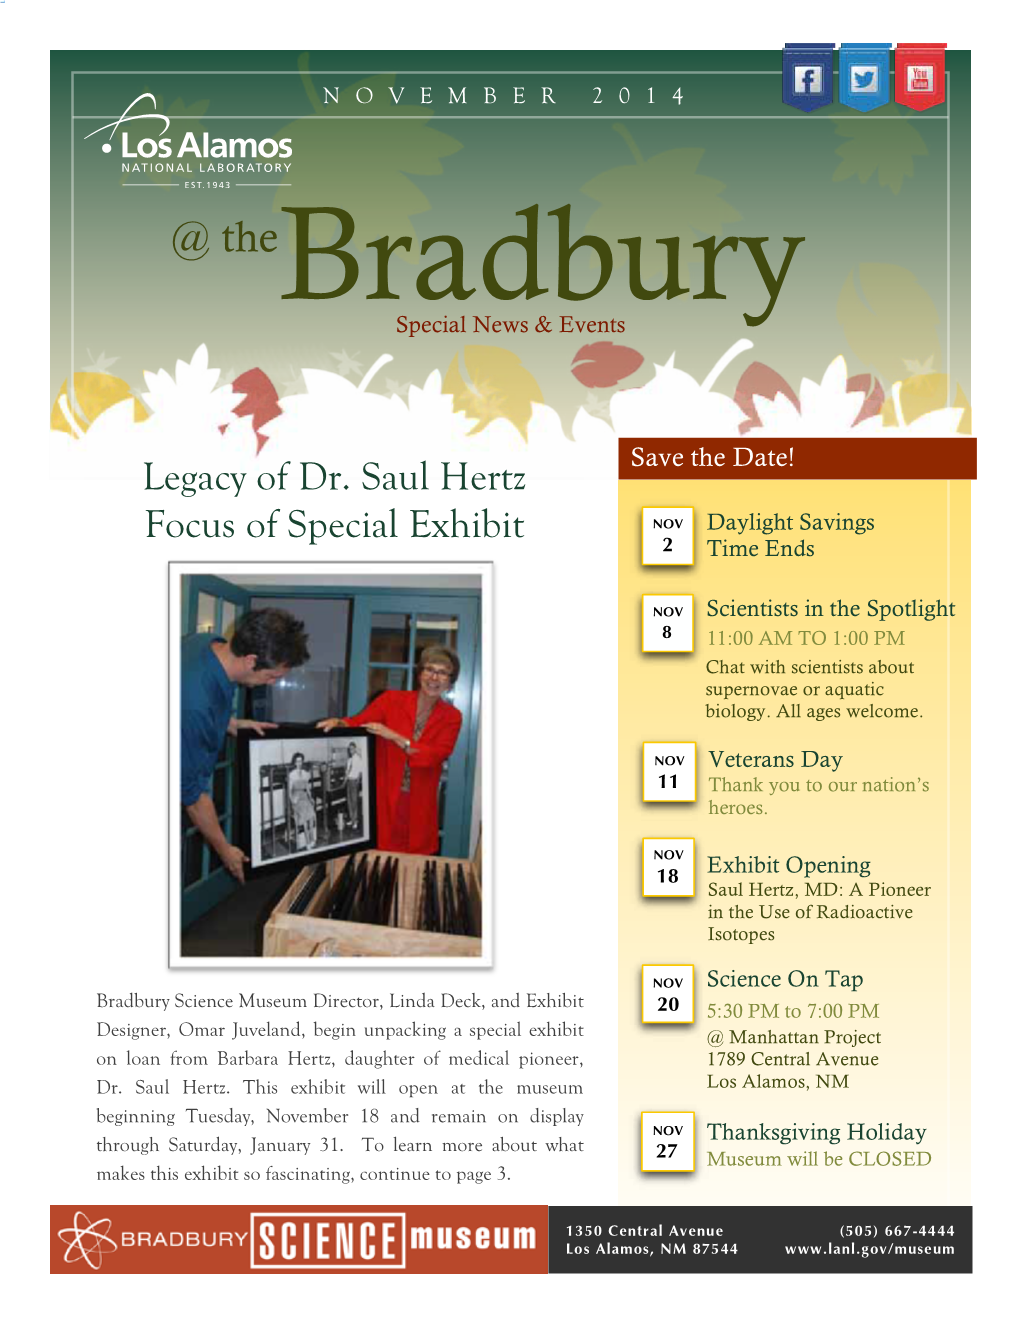 Legacy of Dr. Saul Hertz Focus of Special Exhibit NOV Daylight Savings 2 Time Ends